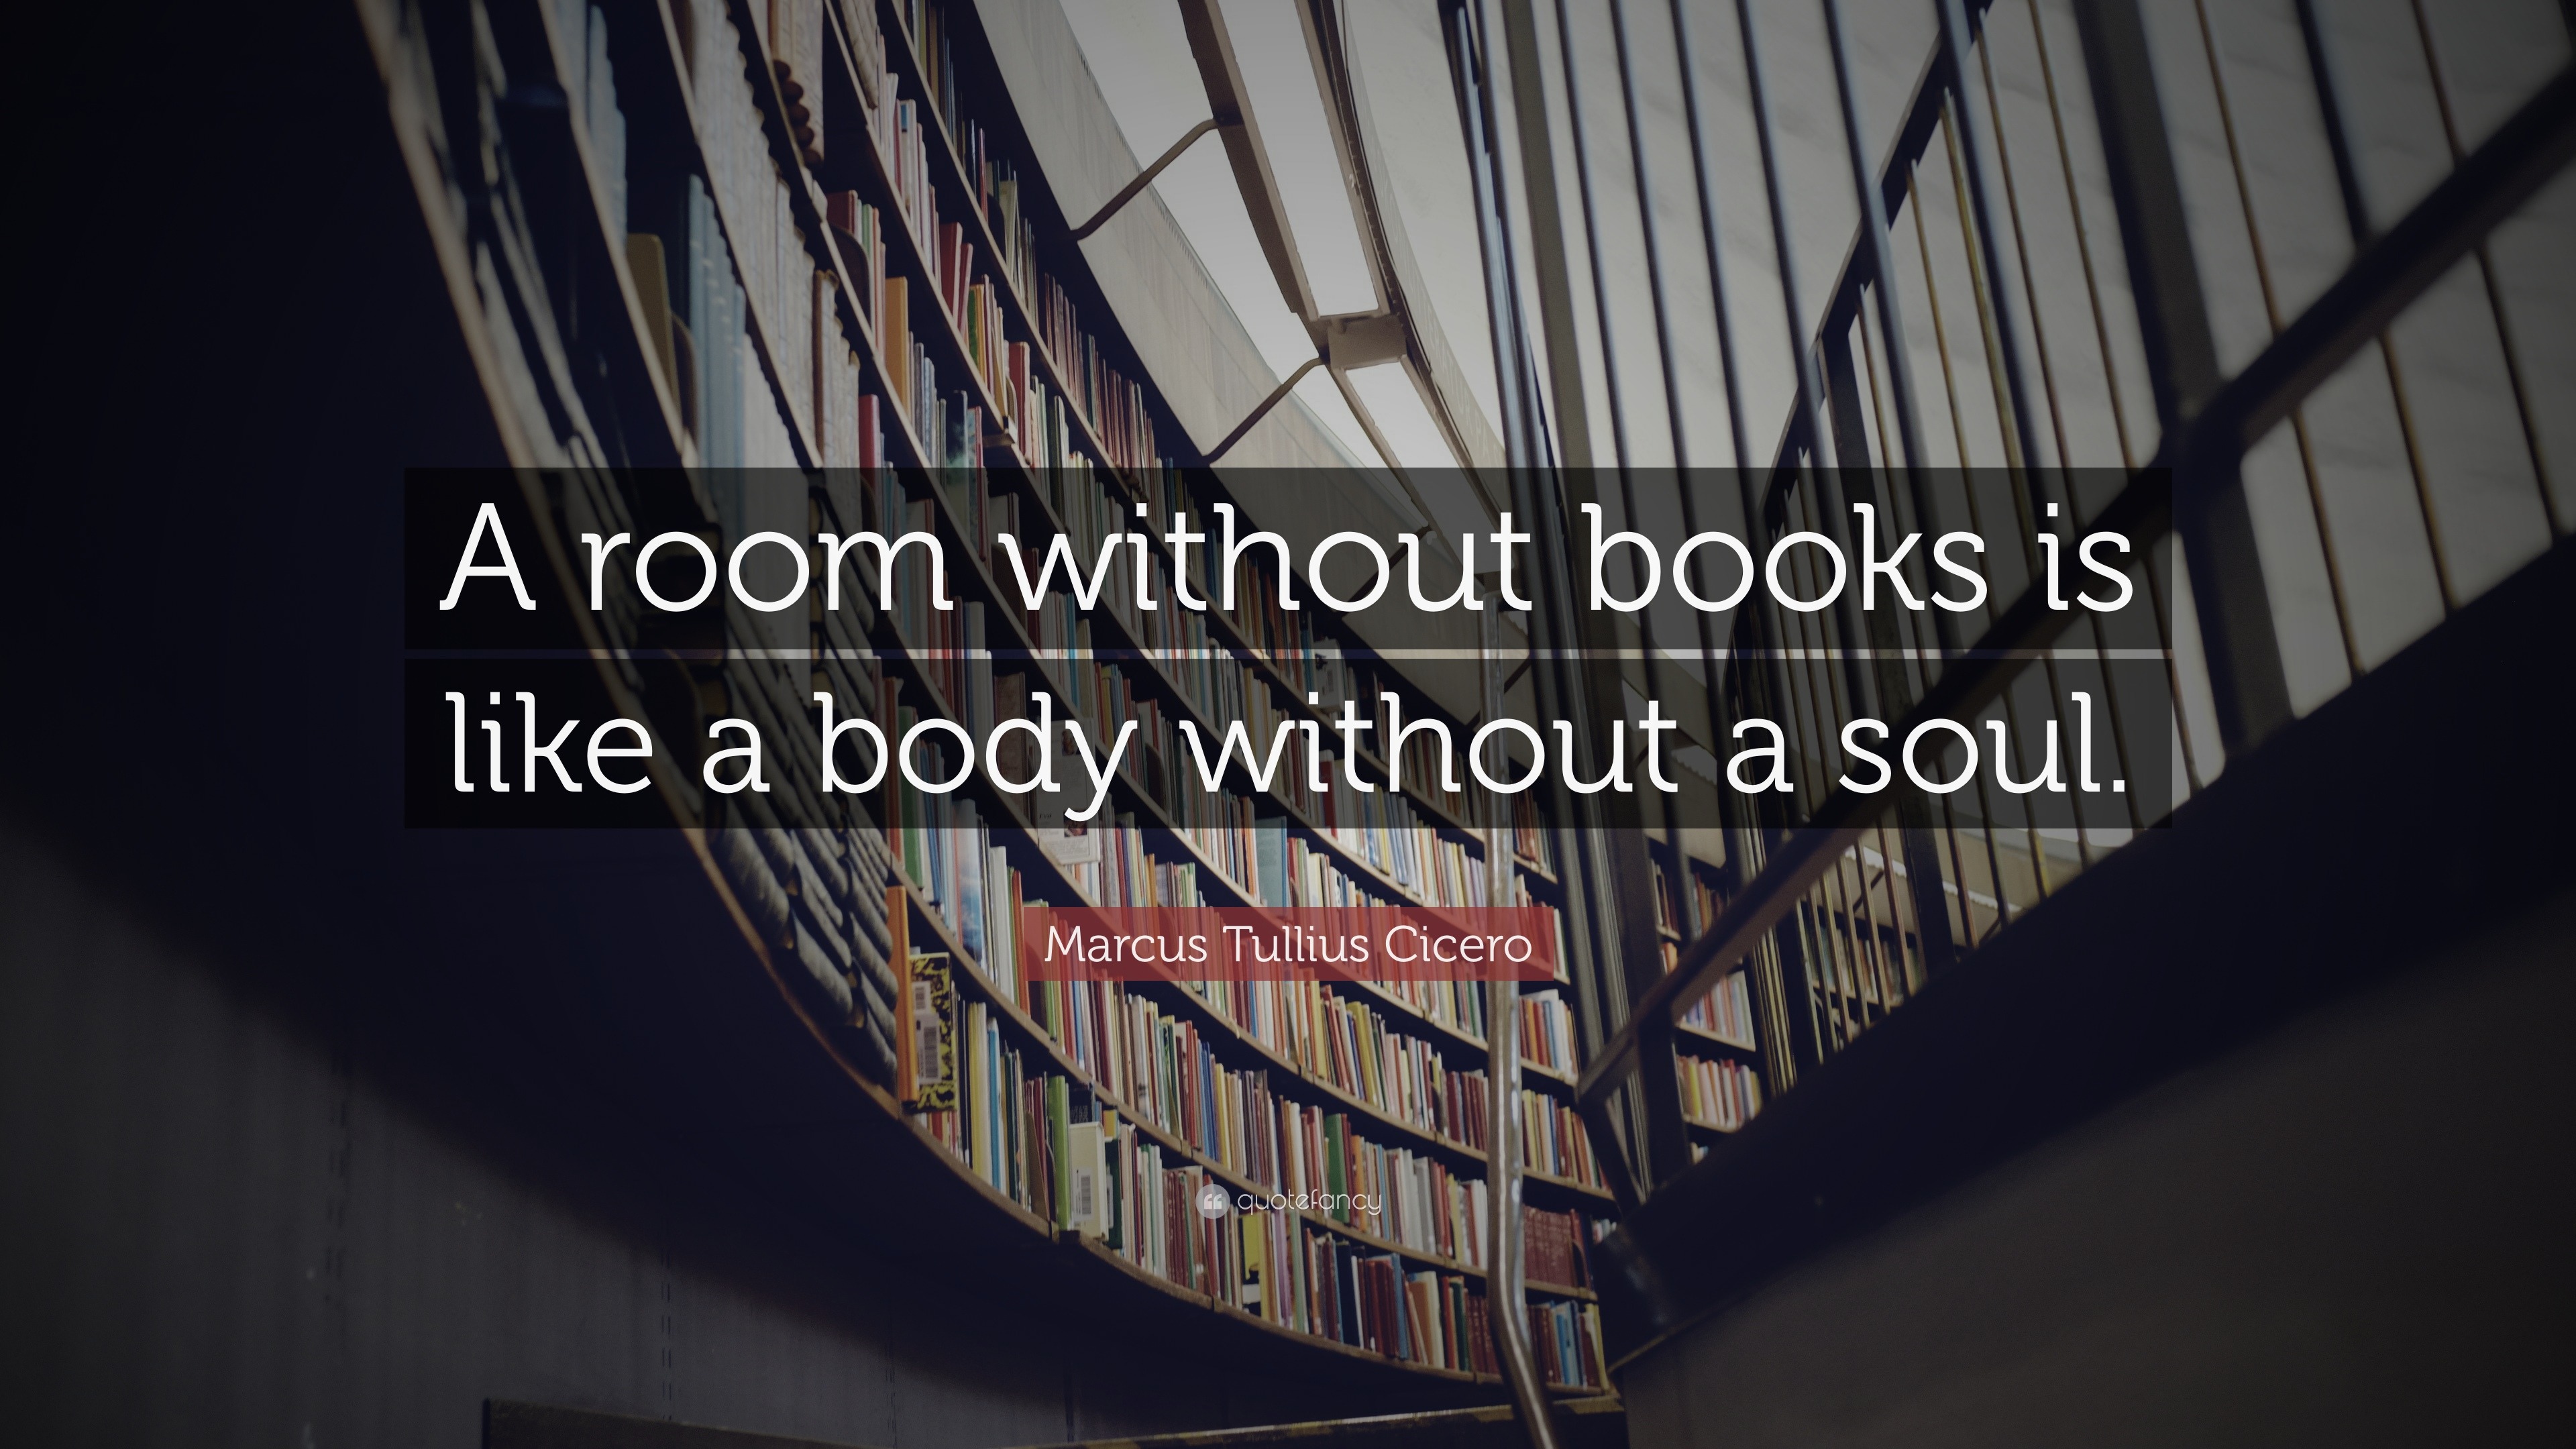 Marcus Tullius Cicero Quote: “A room without books is like a body without a  soul.”